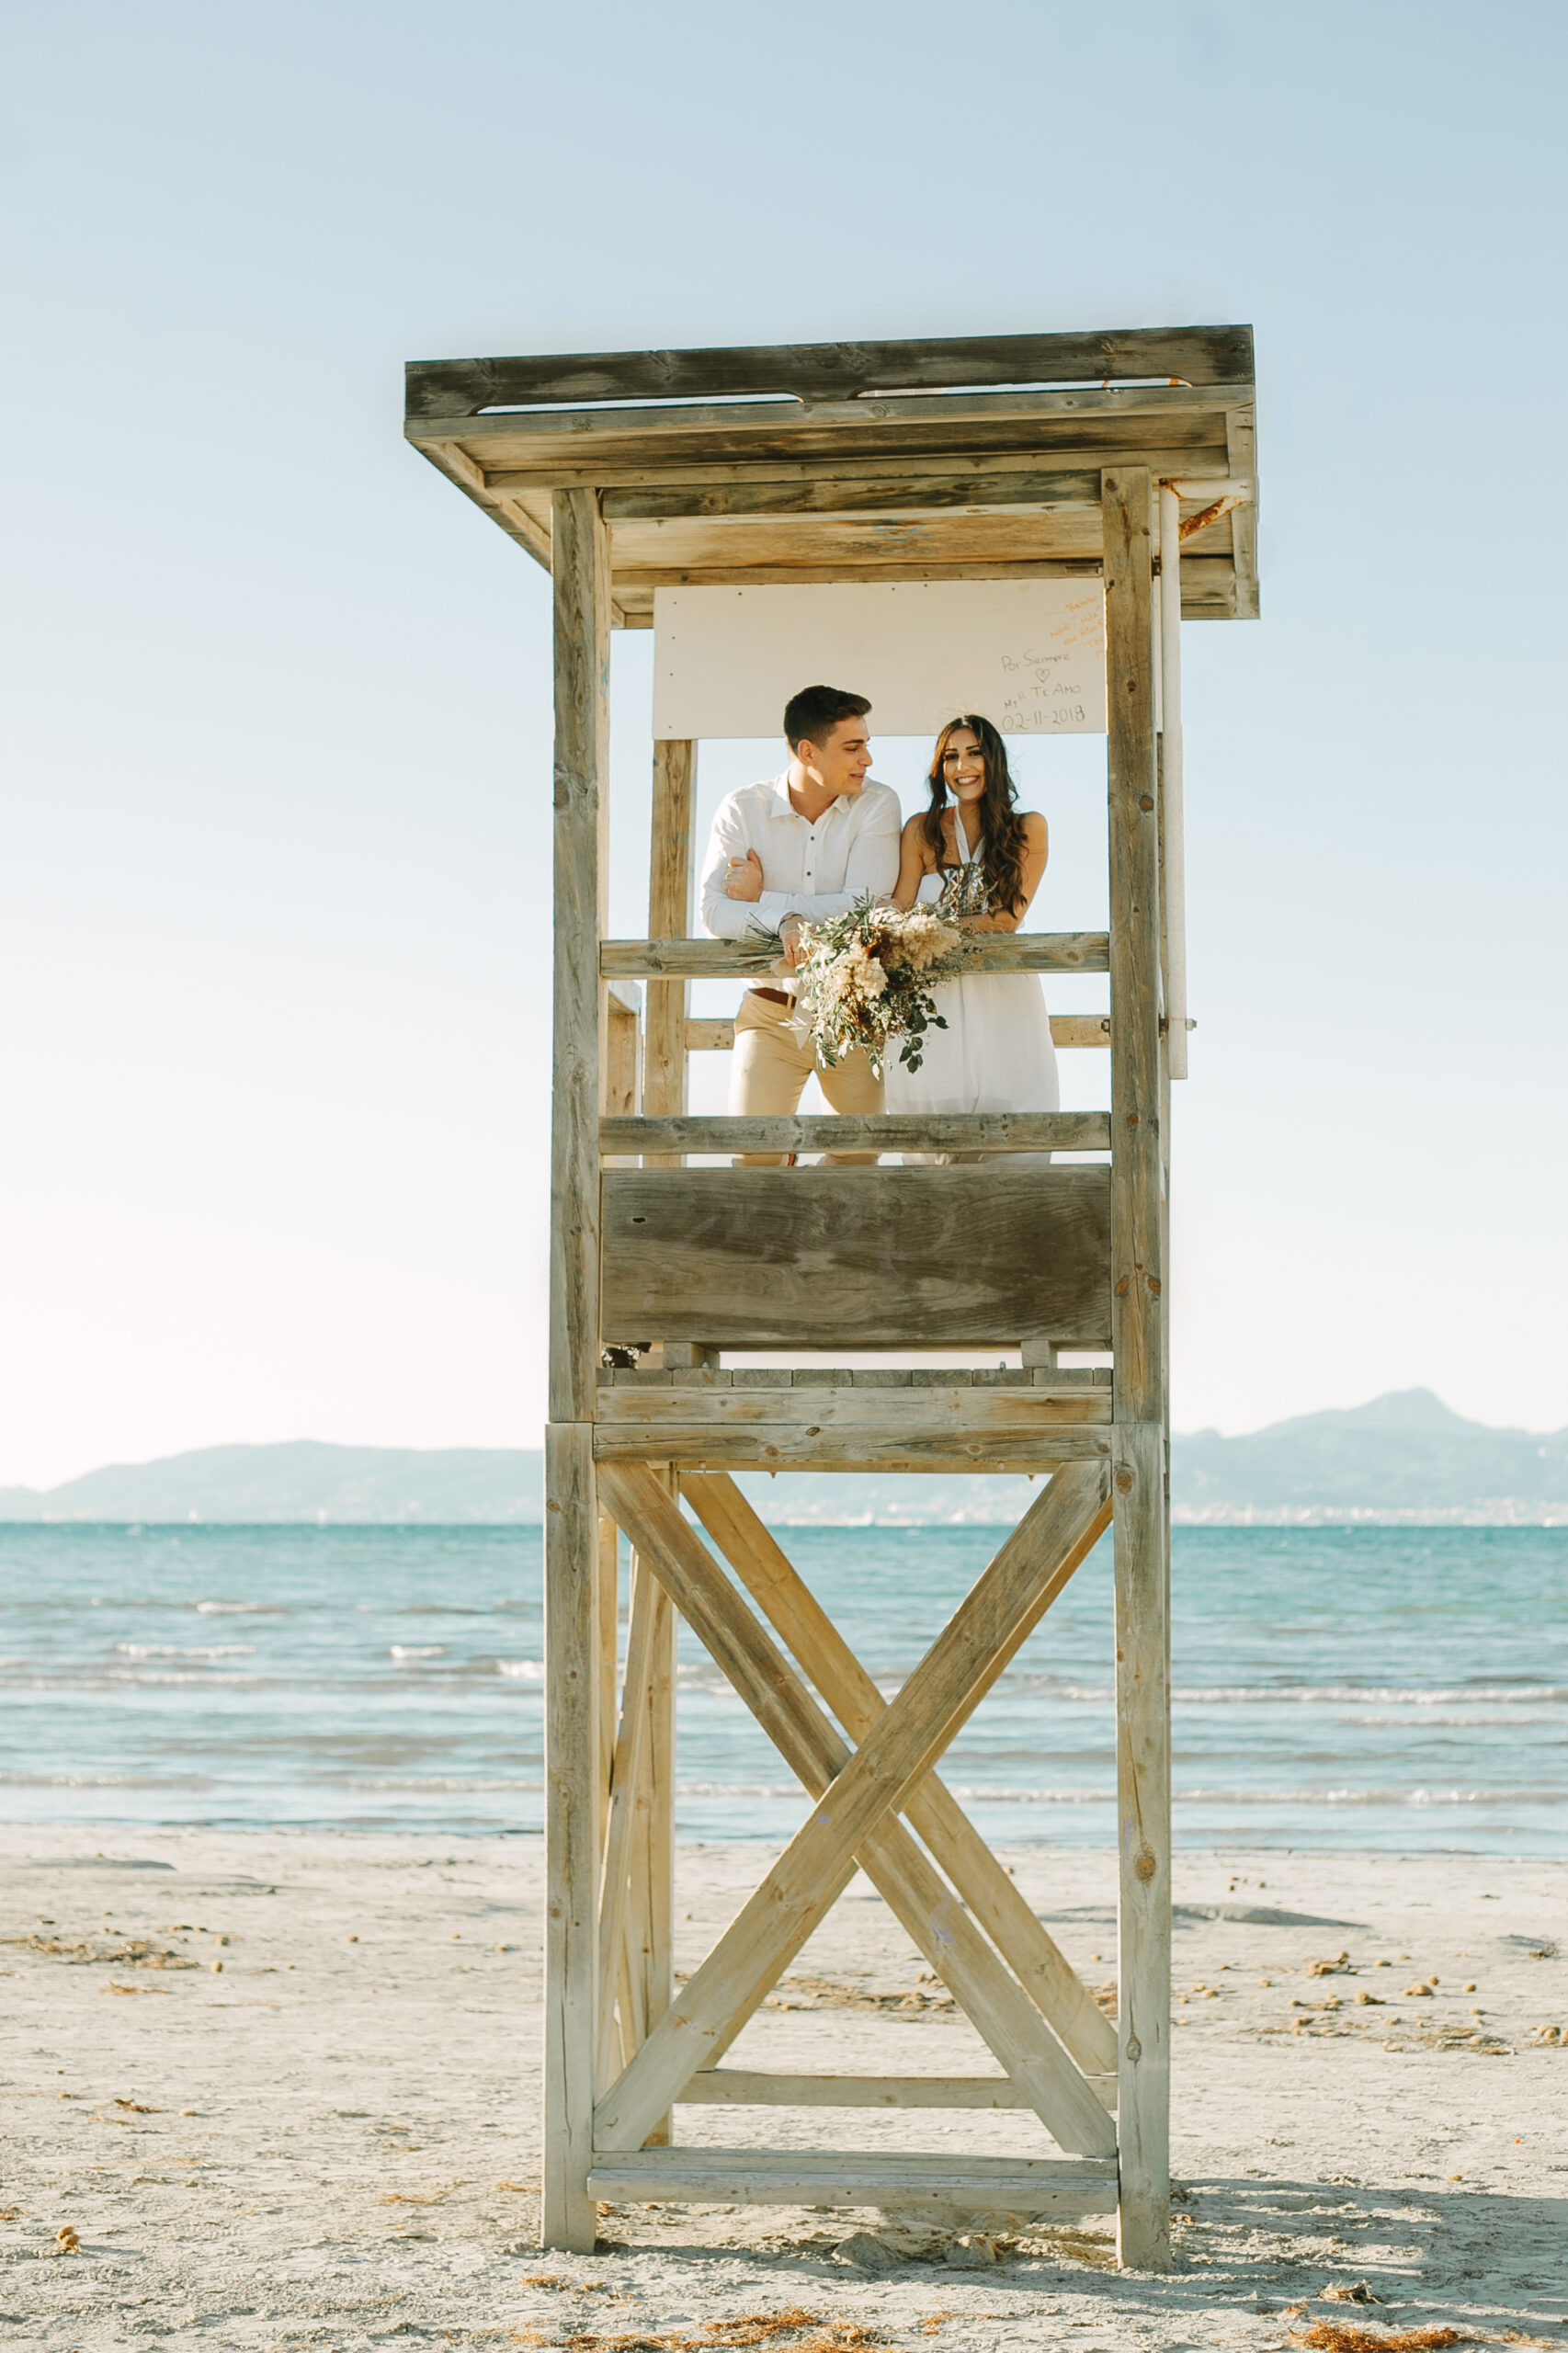 Engaged Couple in Beach Tower